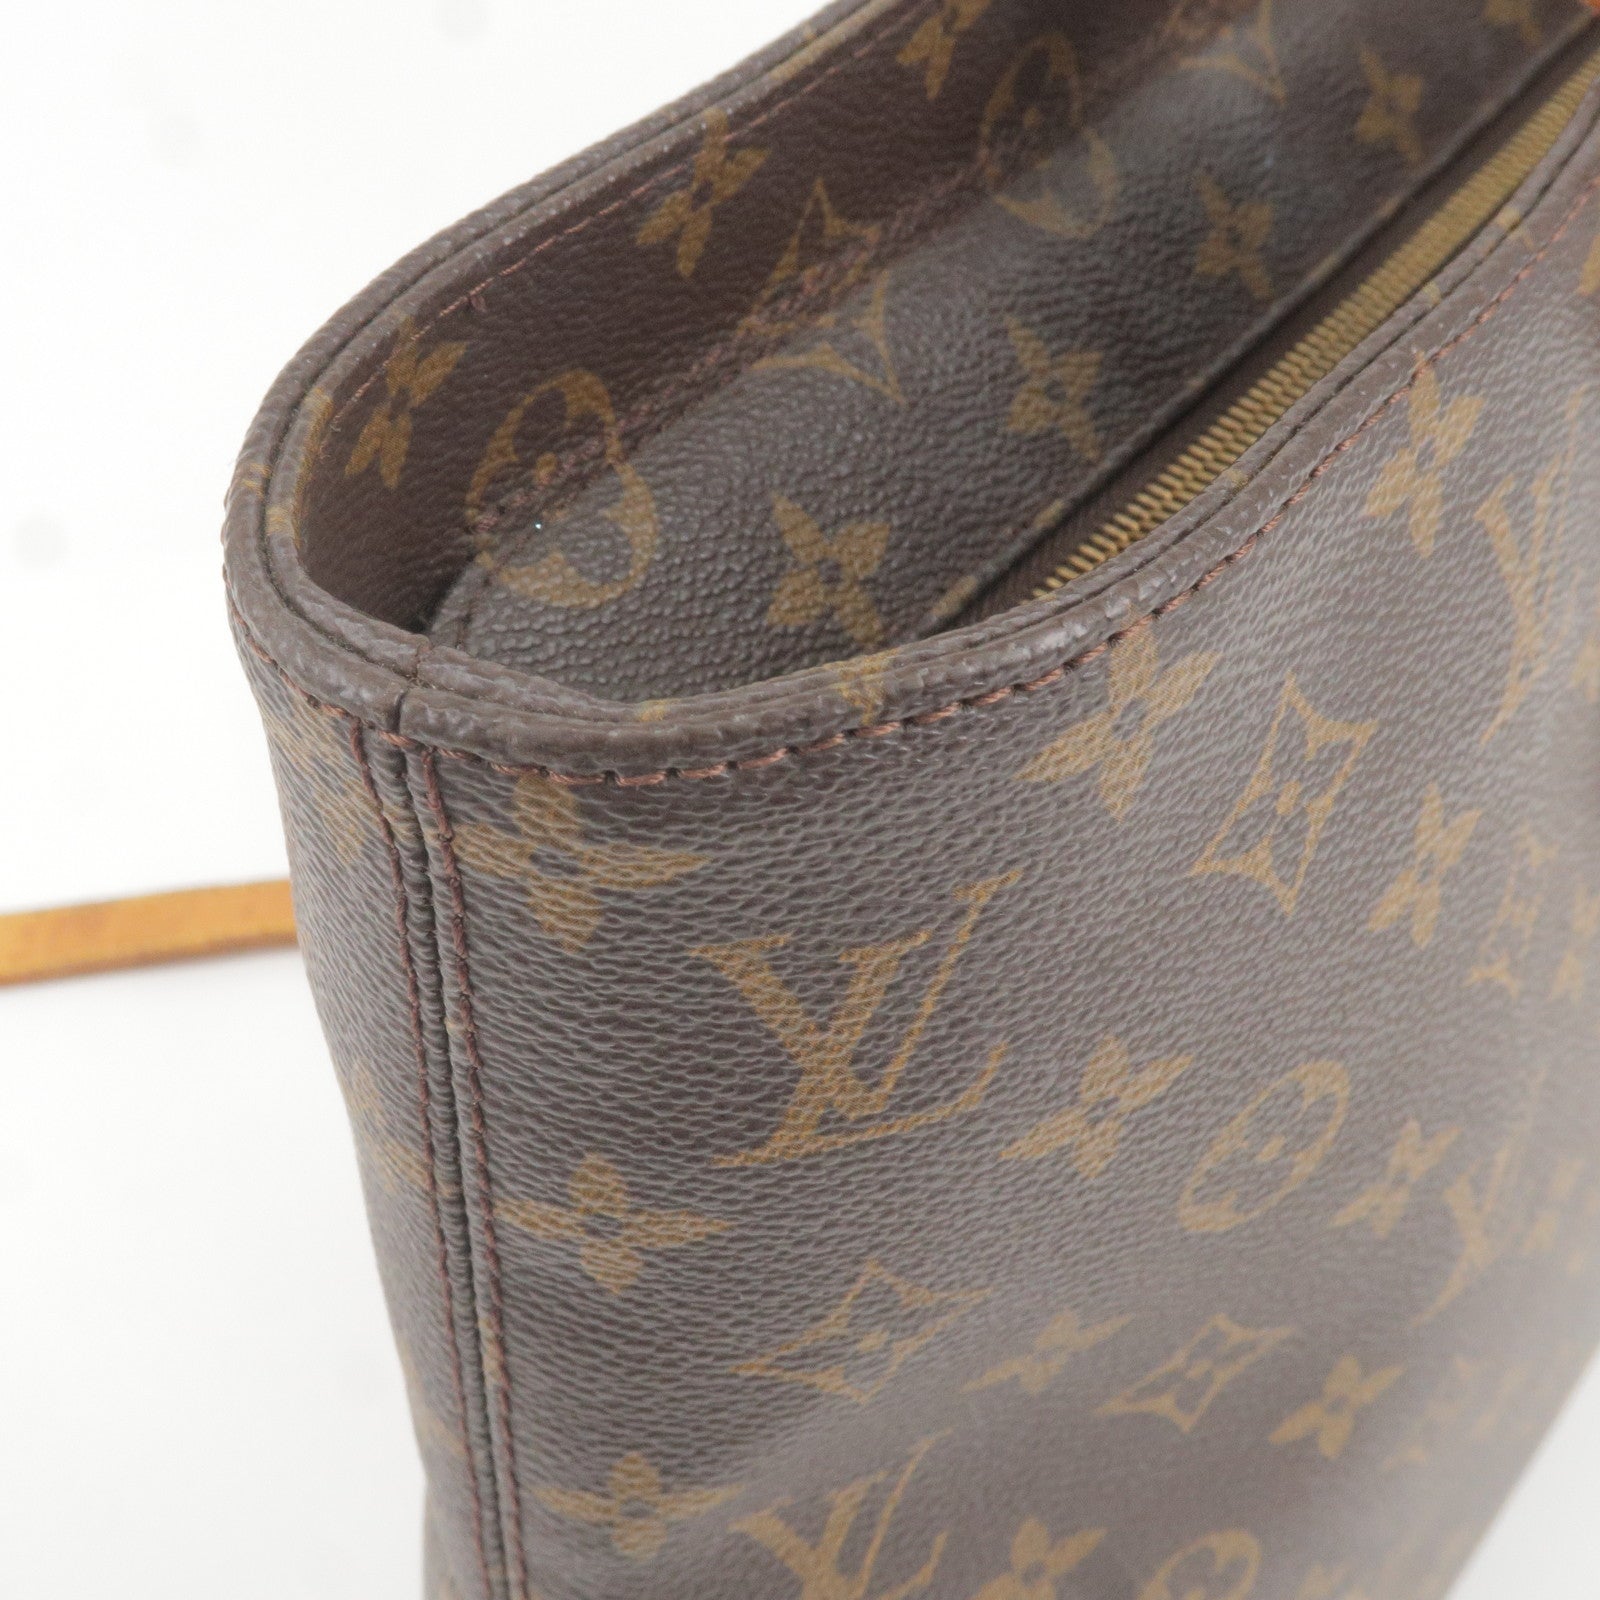 Louis Vuitton MY LV World Tour Palm Springs Mini Backpack in Monogram Noir  - SOLD